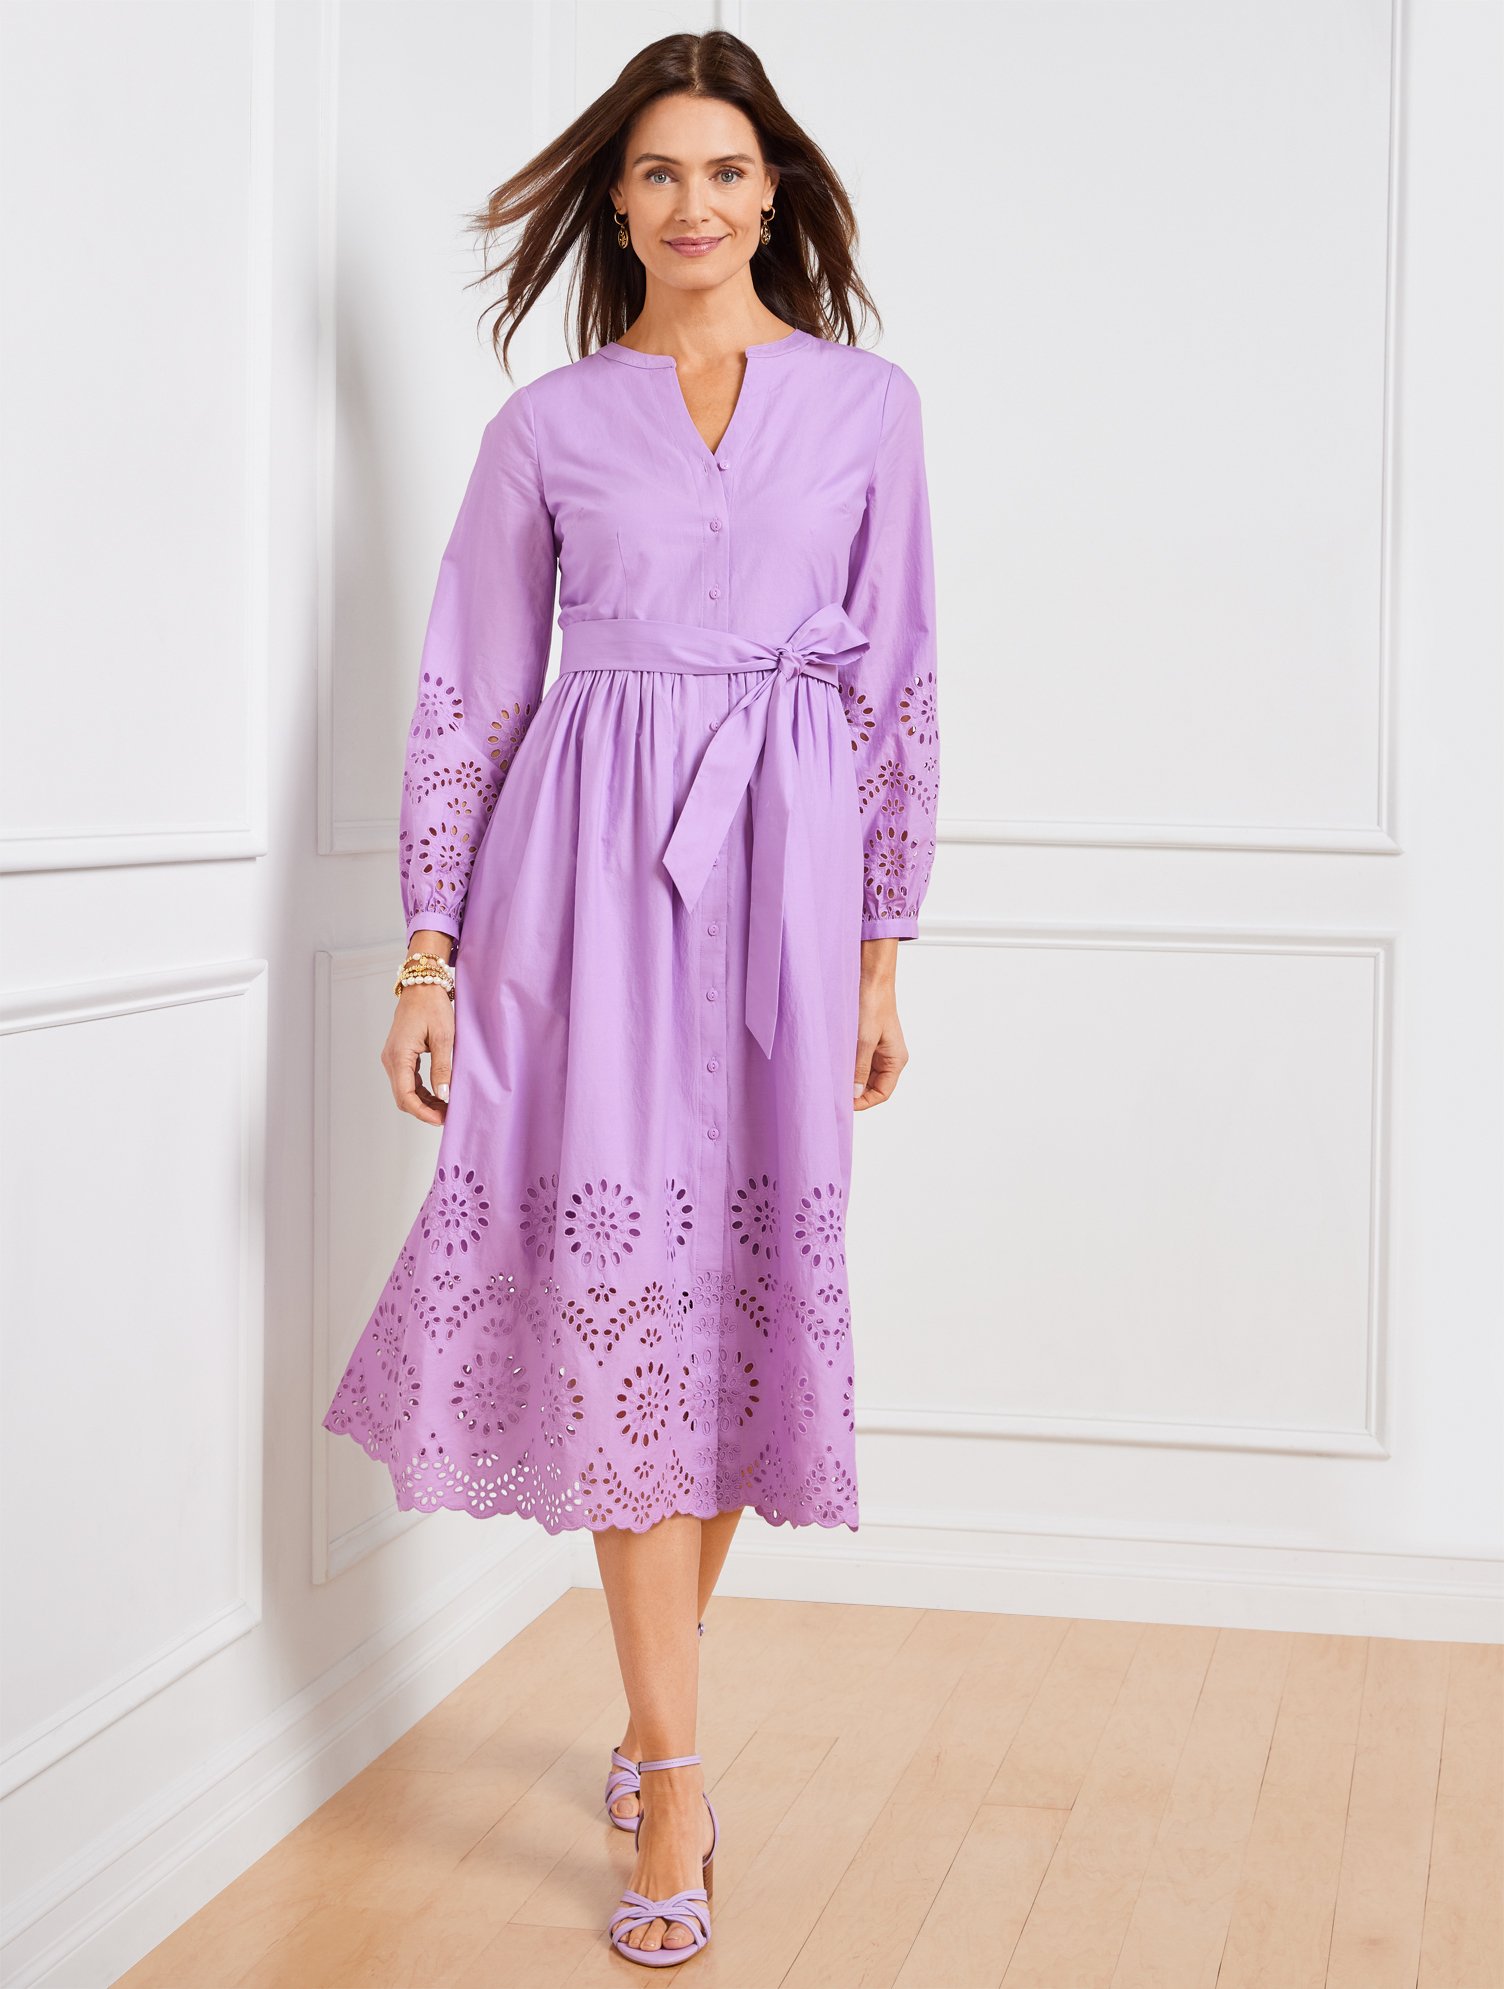 Talbots Placed Eyelet Fit & Flare Shirtdress - Wisteria Purple - 18 - 100% Cotton